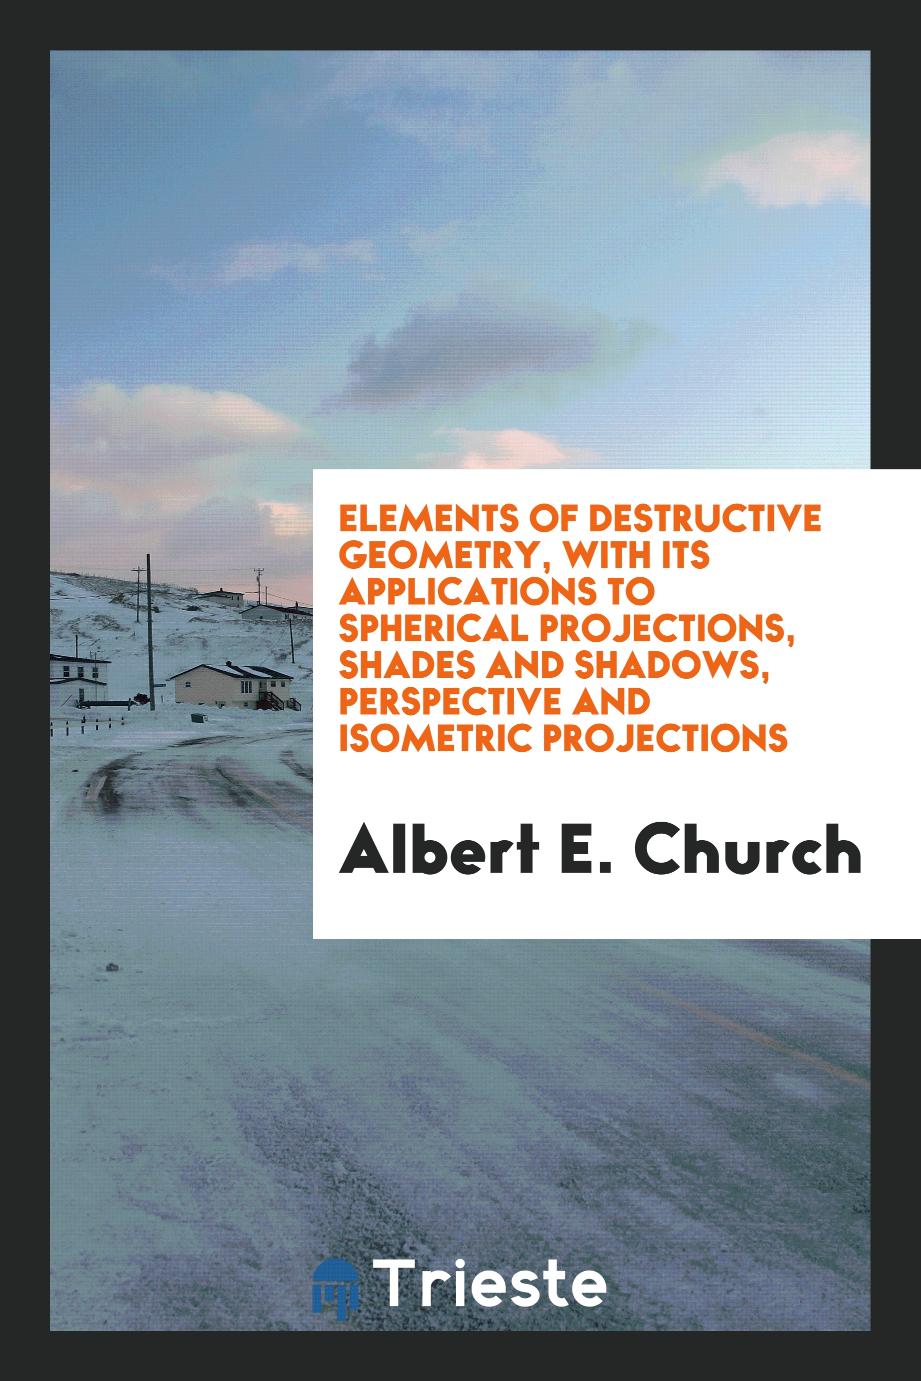 Elements of destructive geometry, with its applications to spherical projections, shades and shadows, perspective and isometric projections